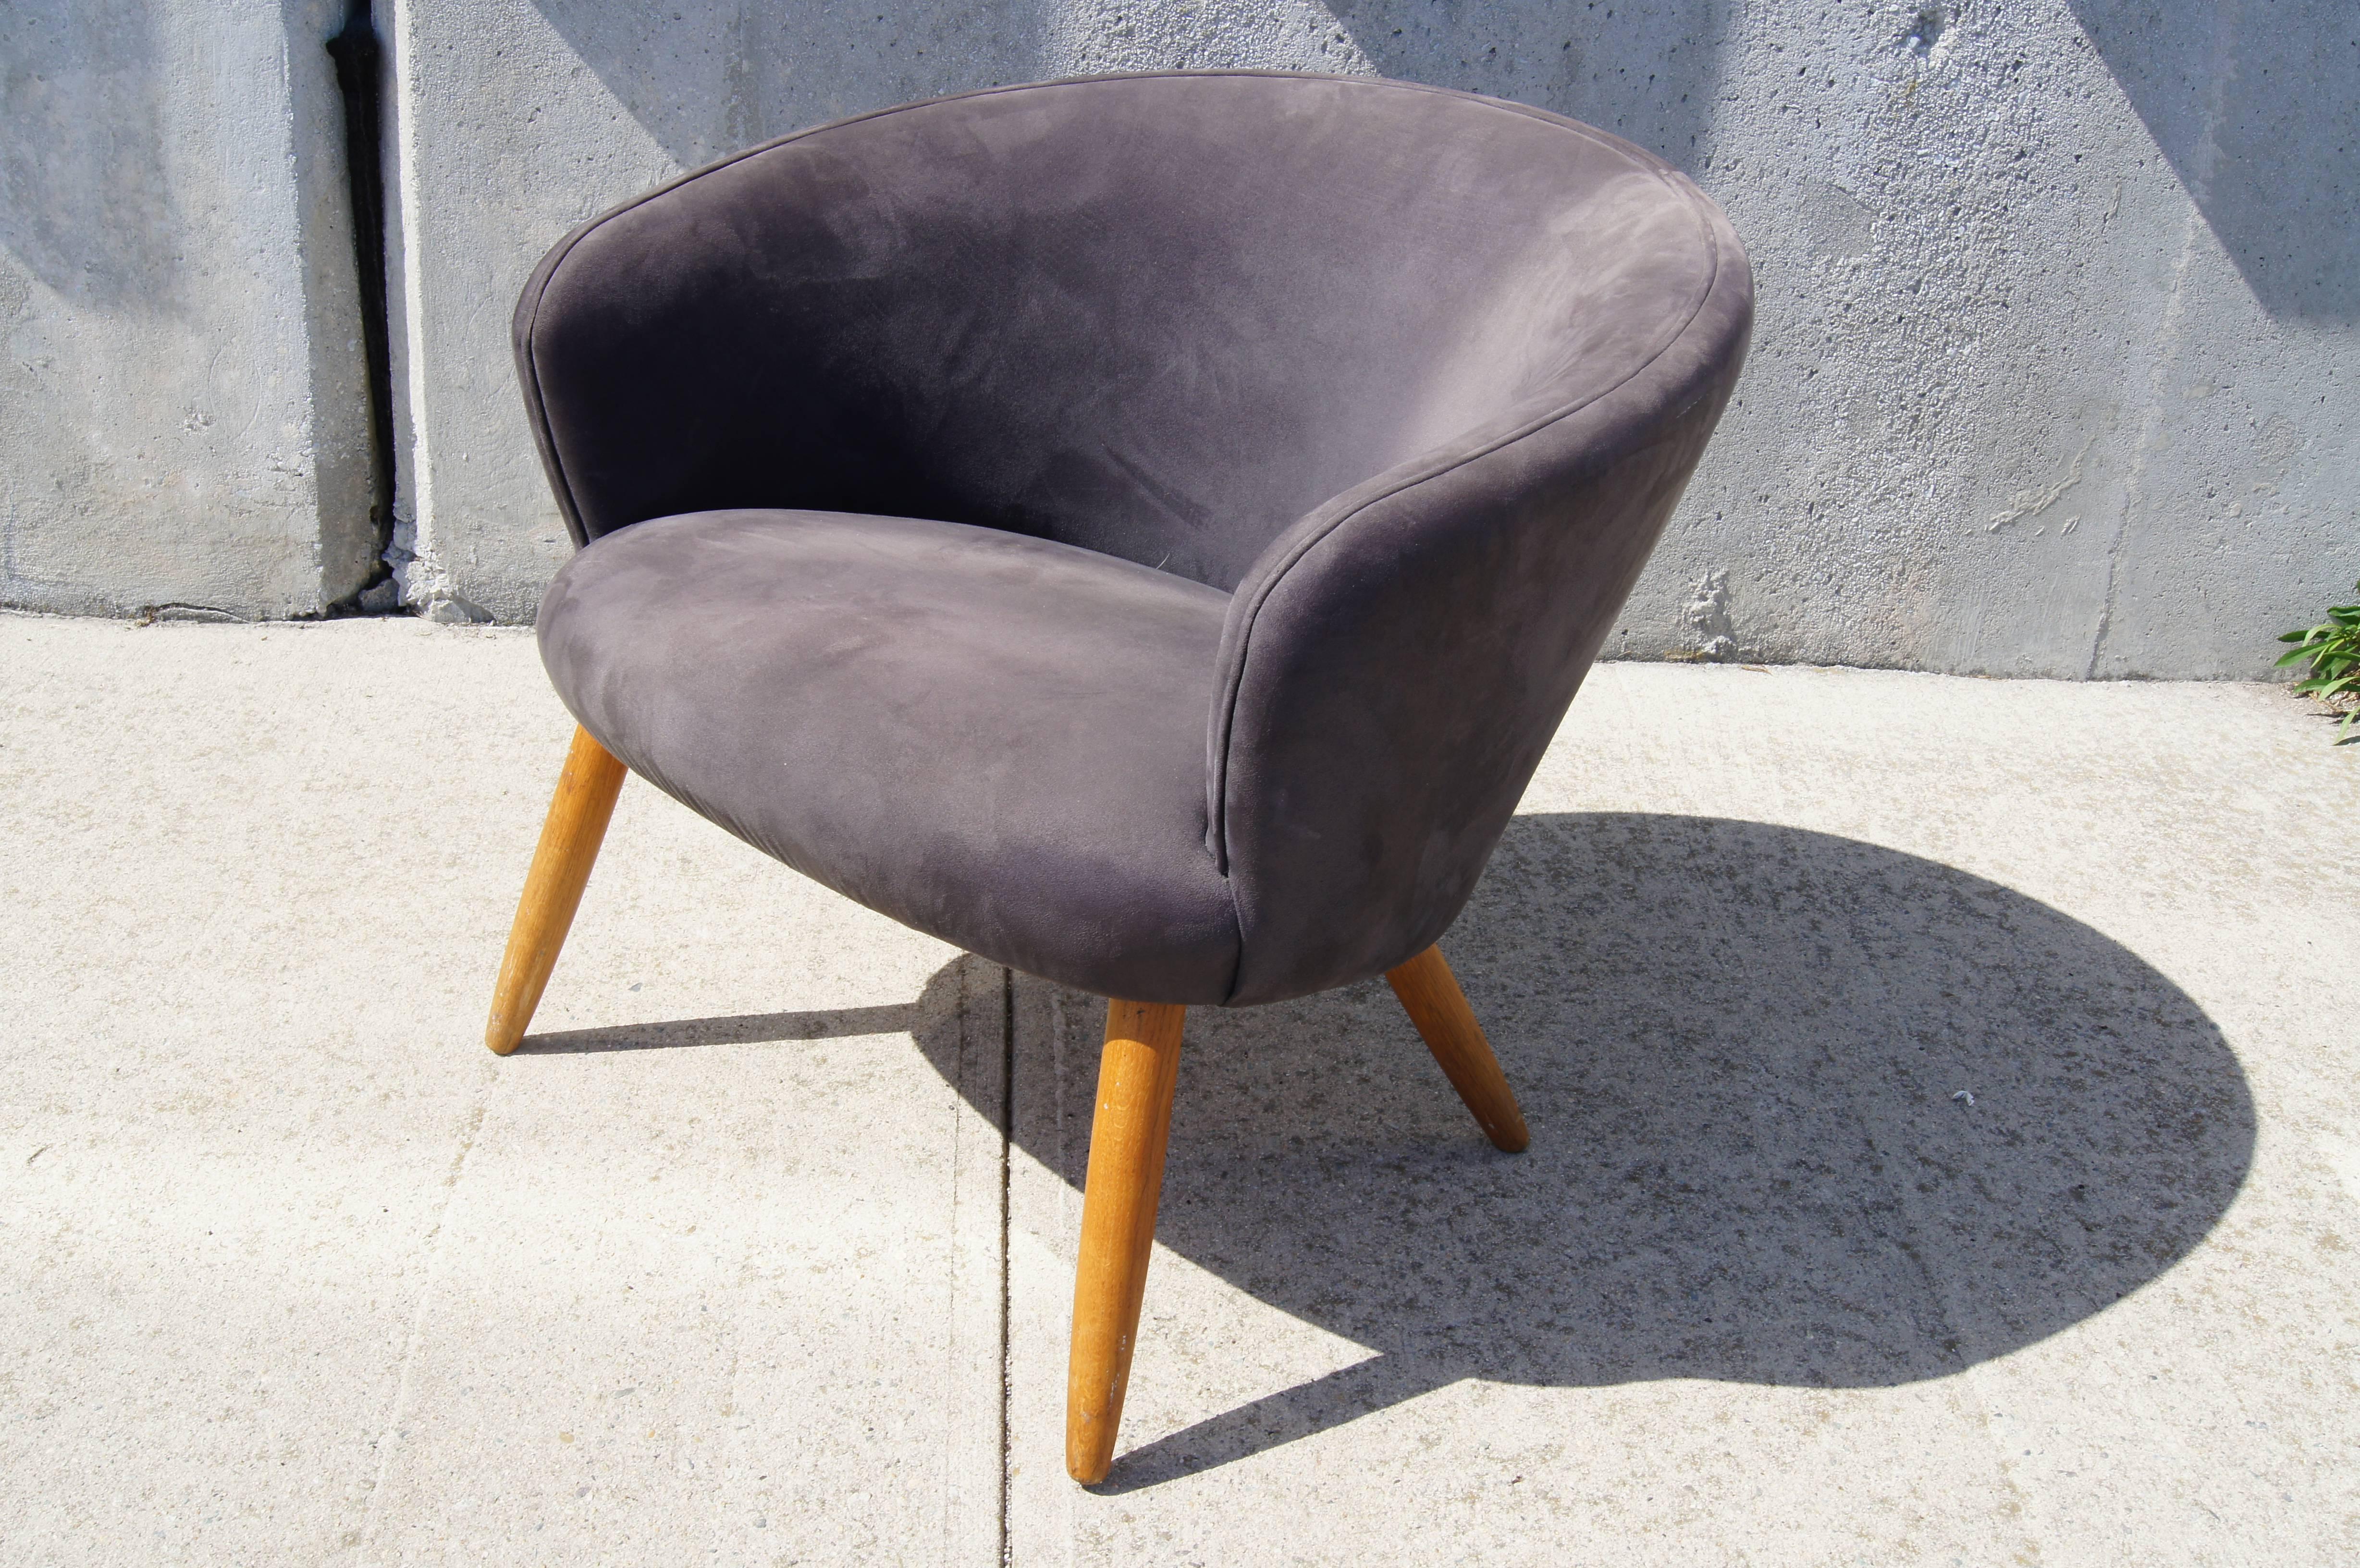 This low easy chair has been designed in the style of Nanna Ditzel's 1953 